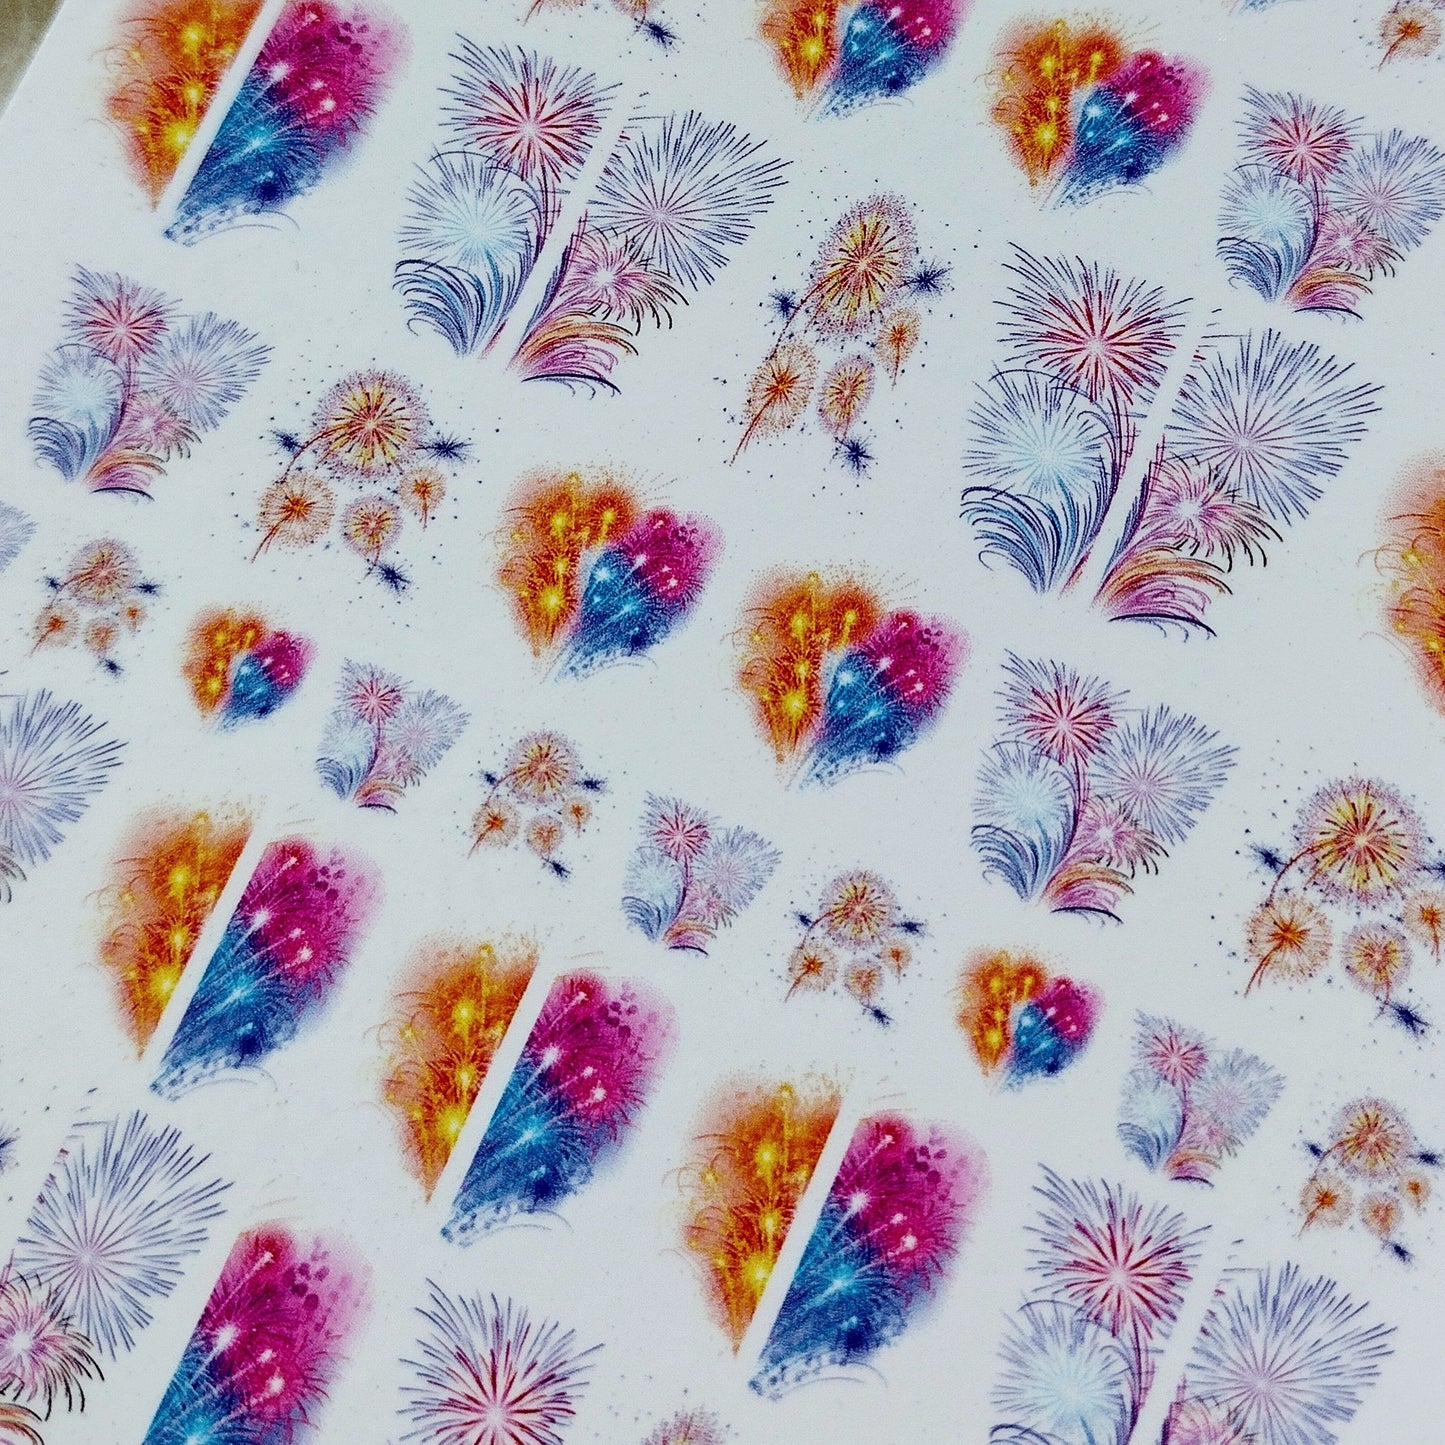 Firework Decals For Nails